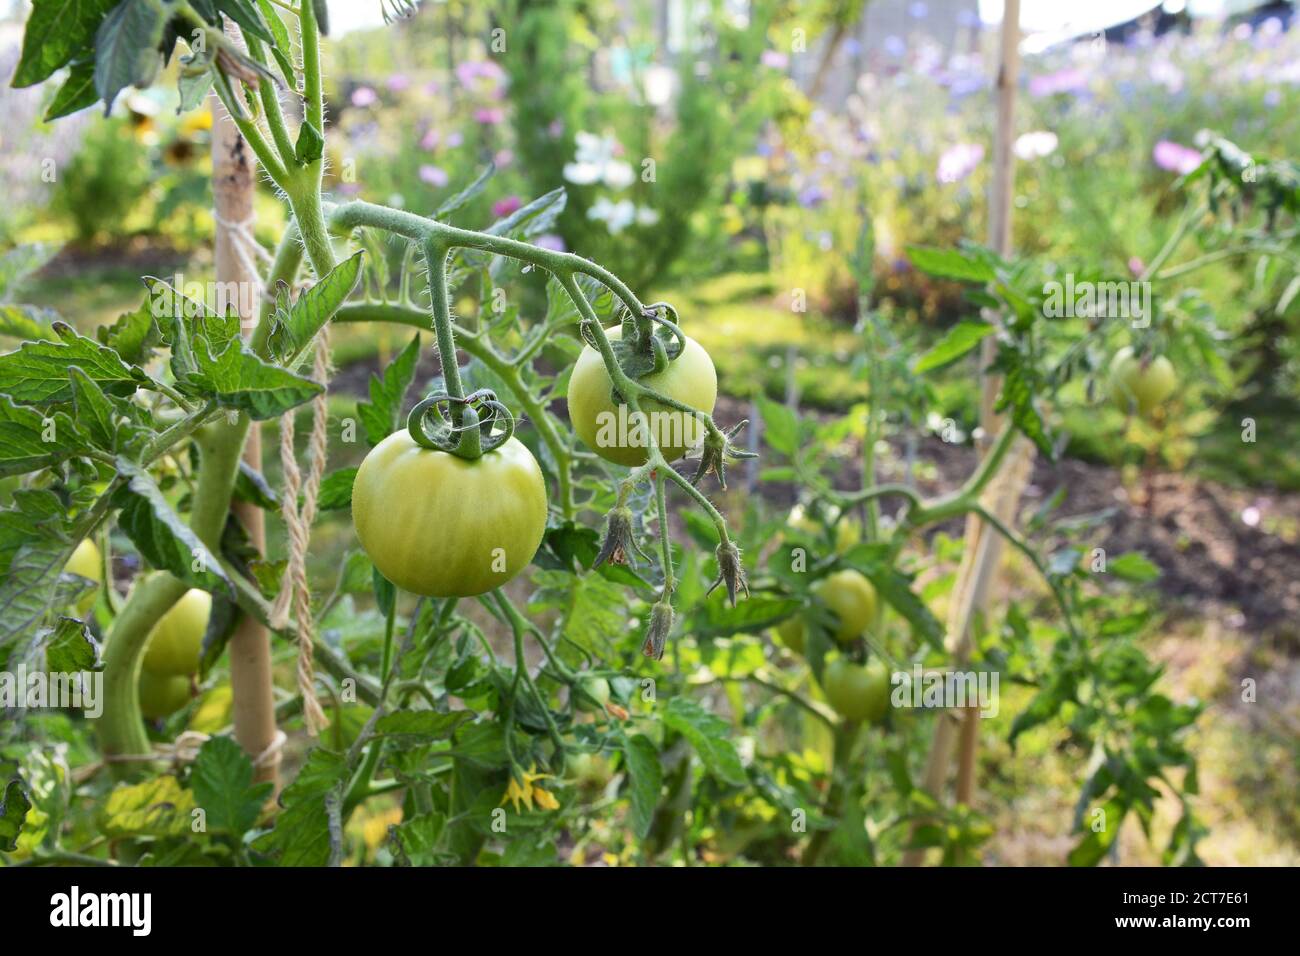 Ferline cordon tomato plant with green fruit, growing in a lush summer vegetable garden. Solanum lycopersicum L. Stock Photo